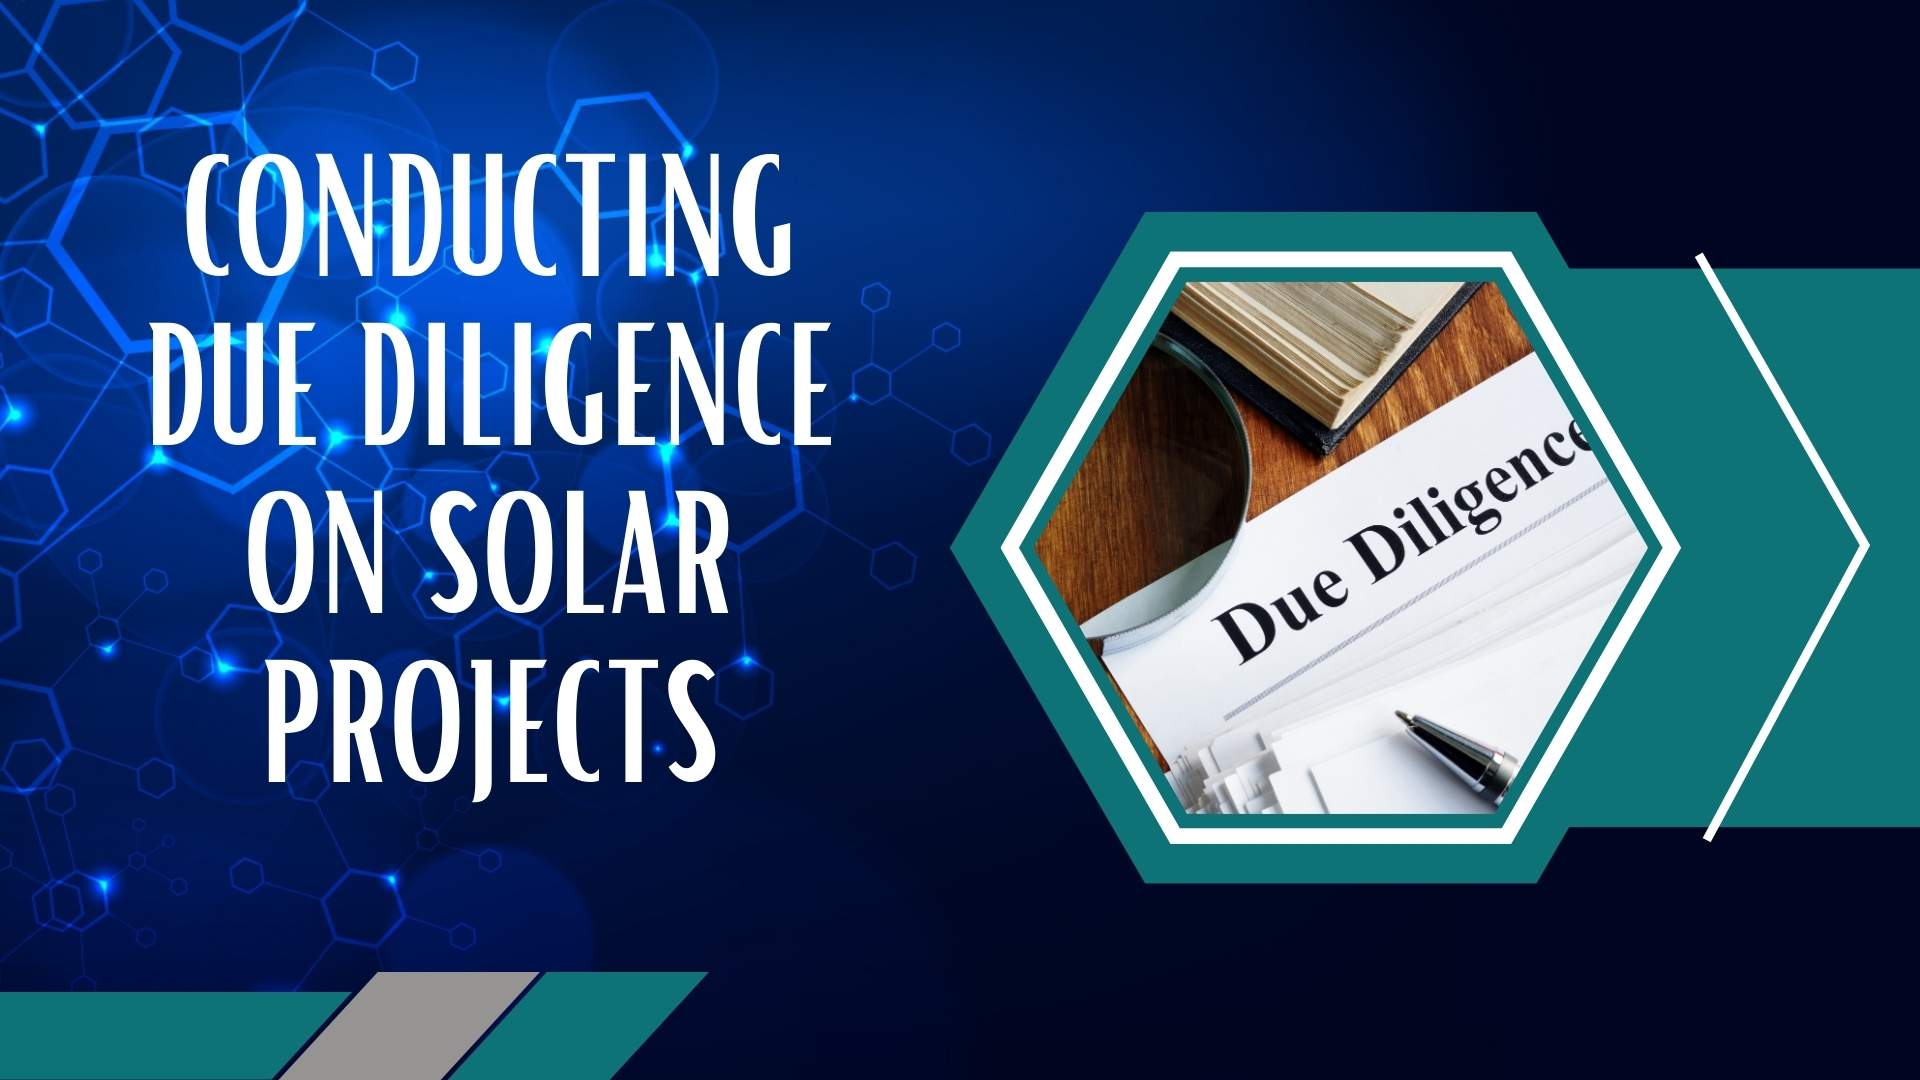 Conducting due diligence on solar projects